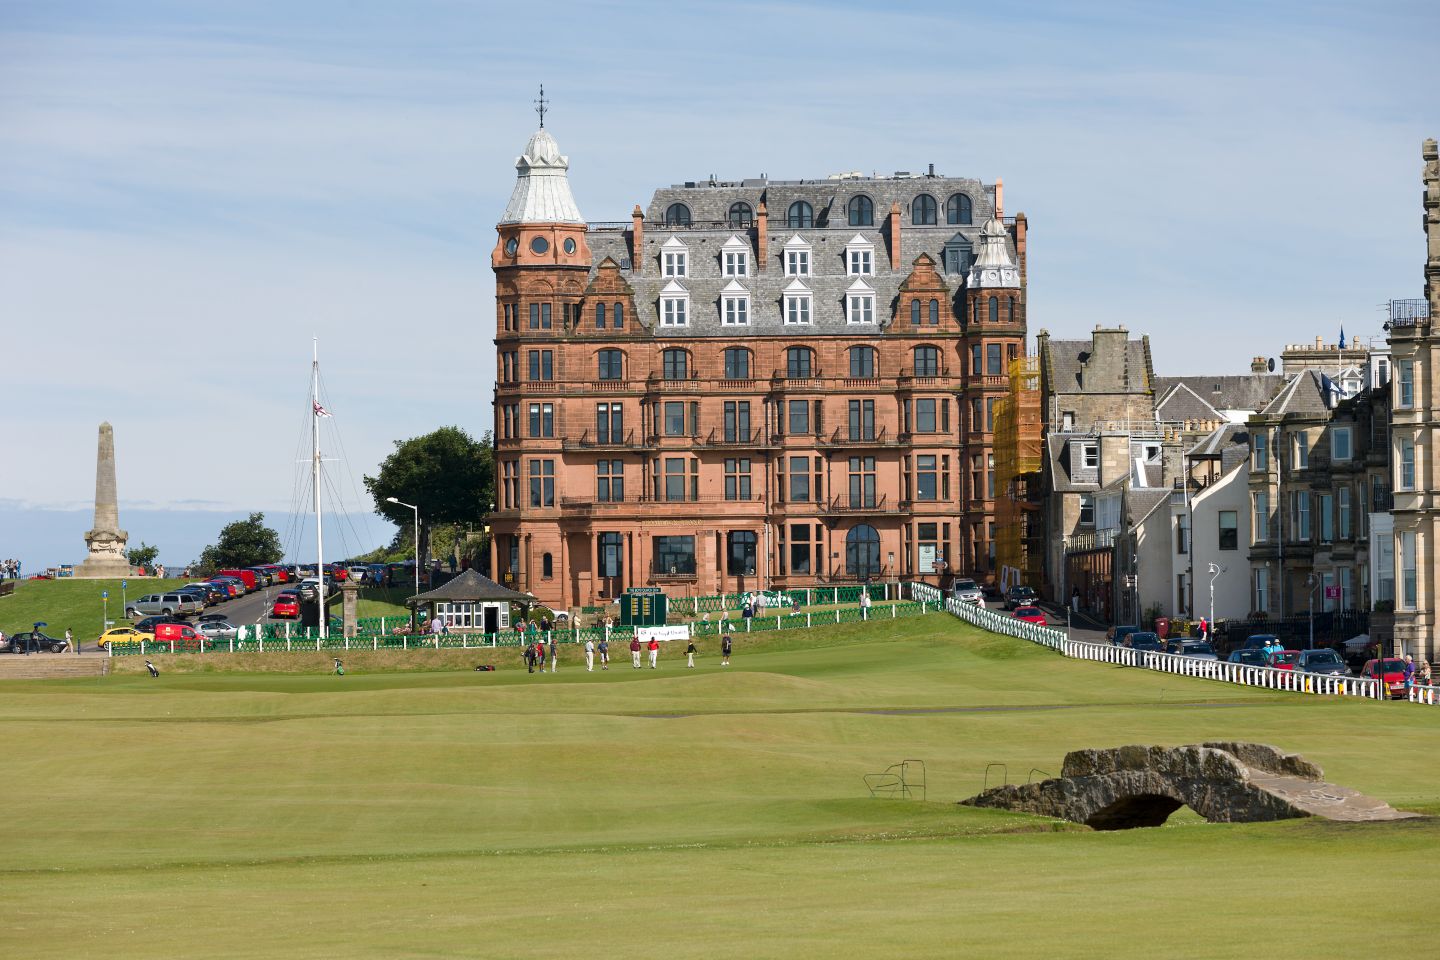 the 17th green and fairway with Hamilton Grand's exterior in the background